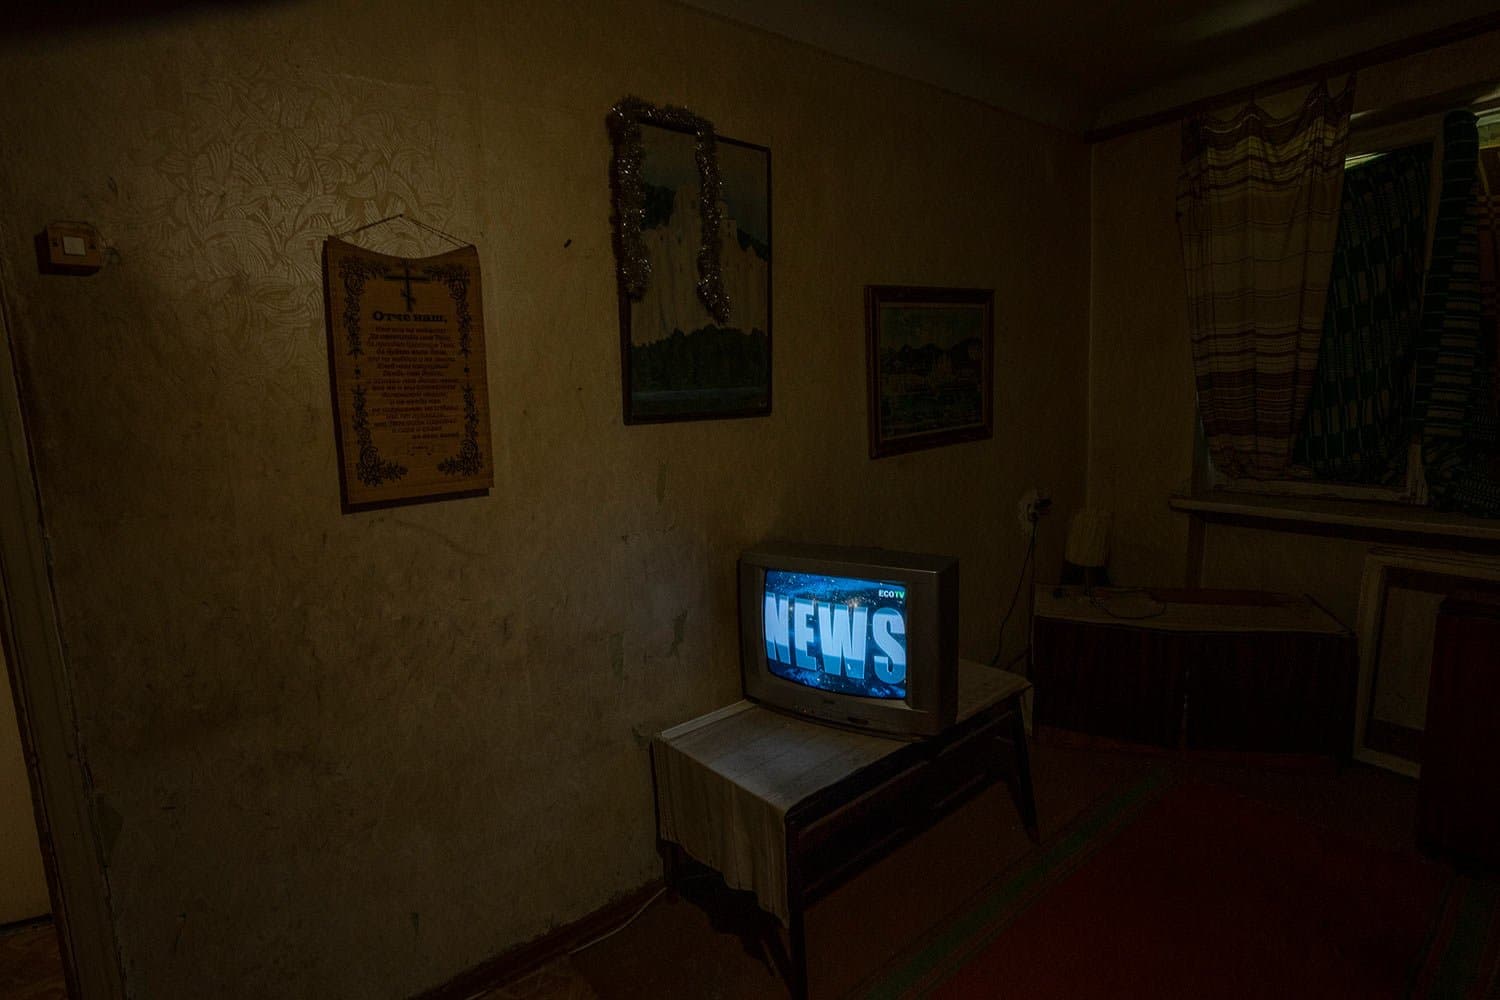 Seventy-year-old pensioner Valerii Ilchenko, who lives alone and is refusing to evacuate, watches the news on his tv in his apartment, in Kramatorsk